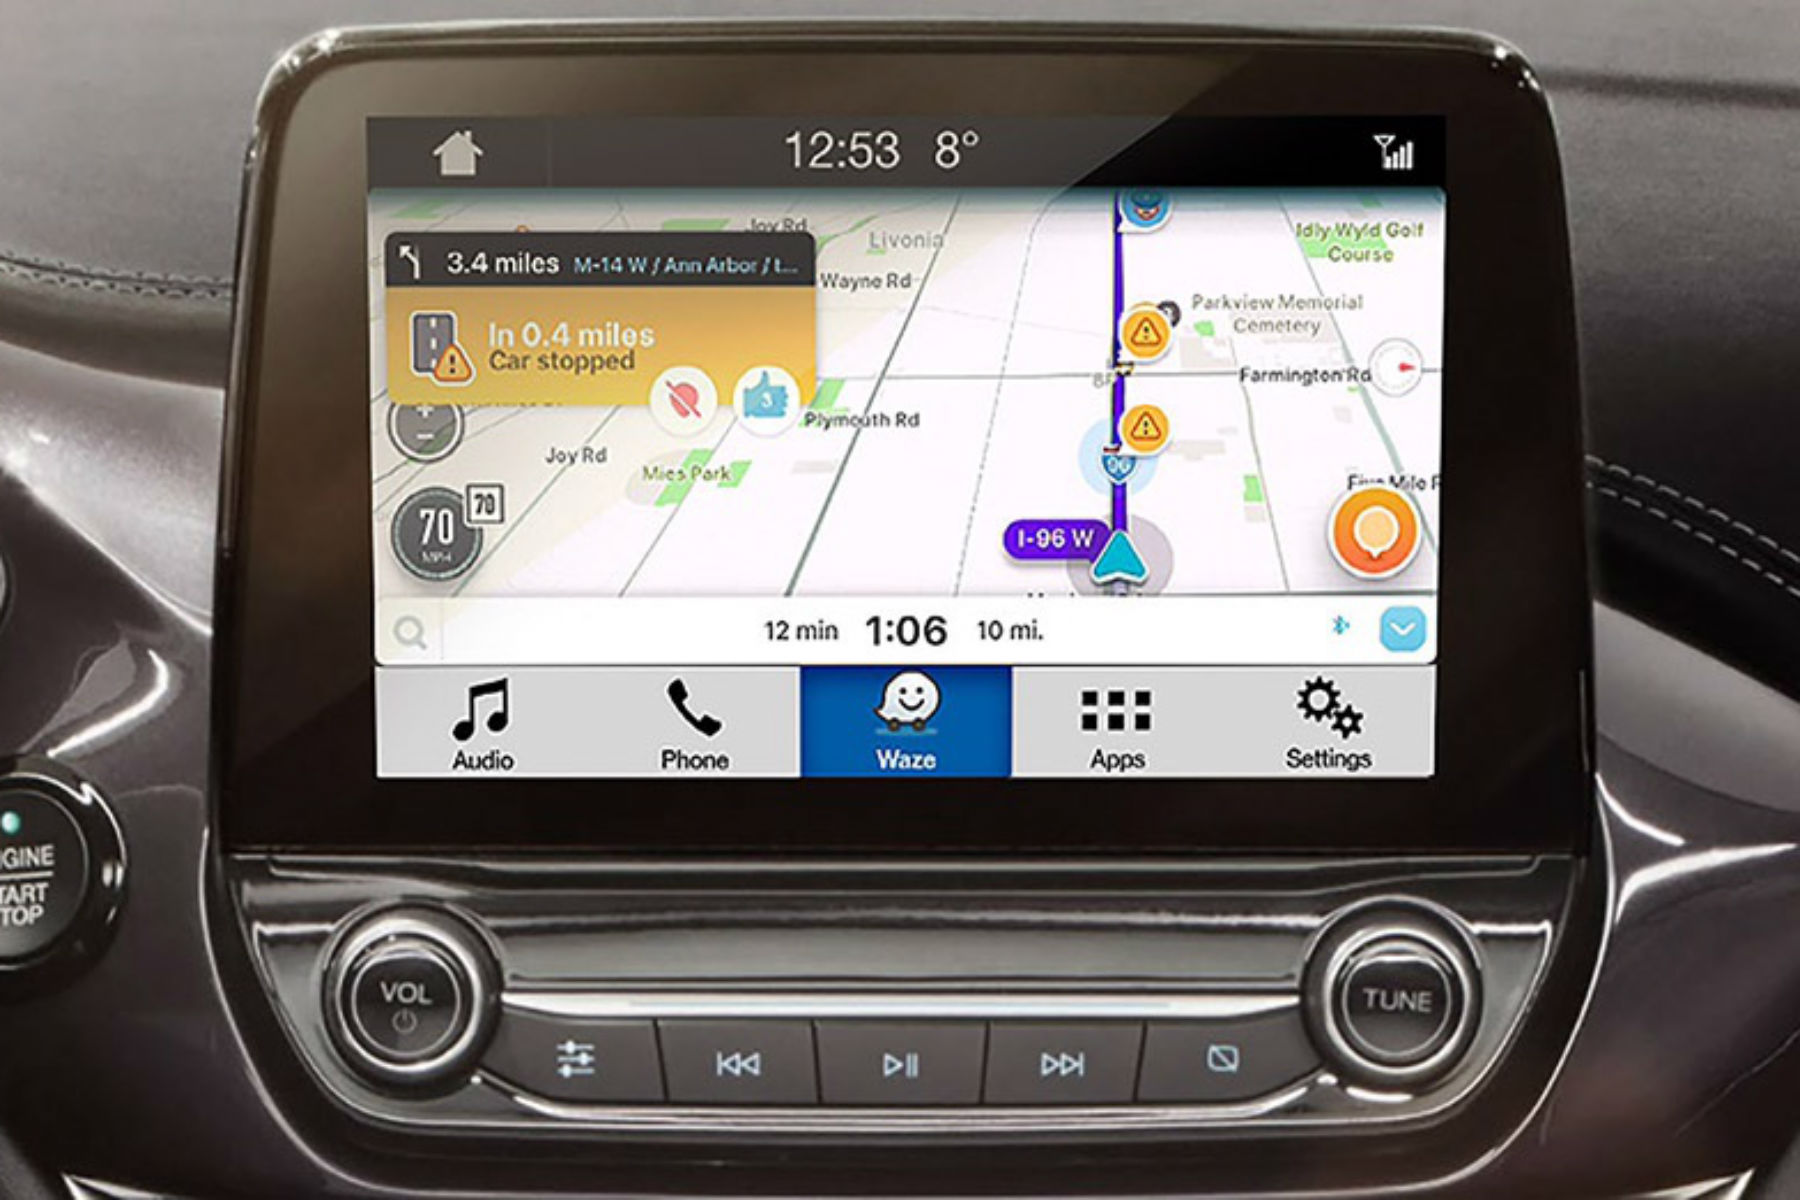 You can now use Waze via your Ford's infotainment system